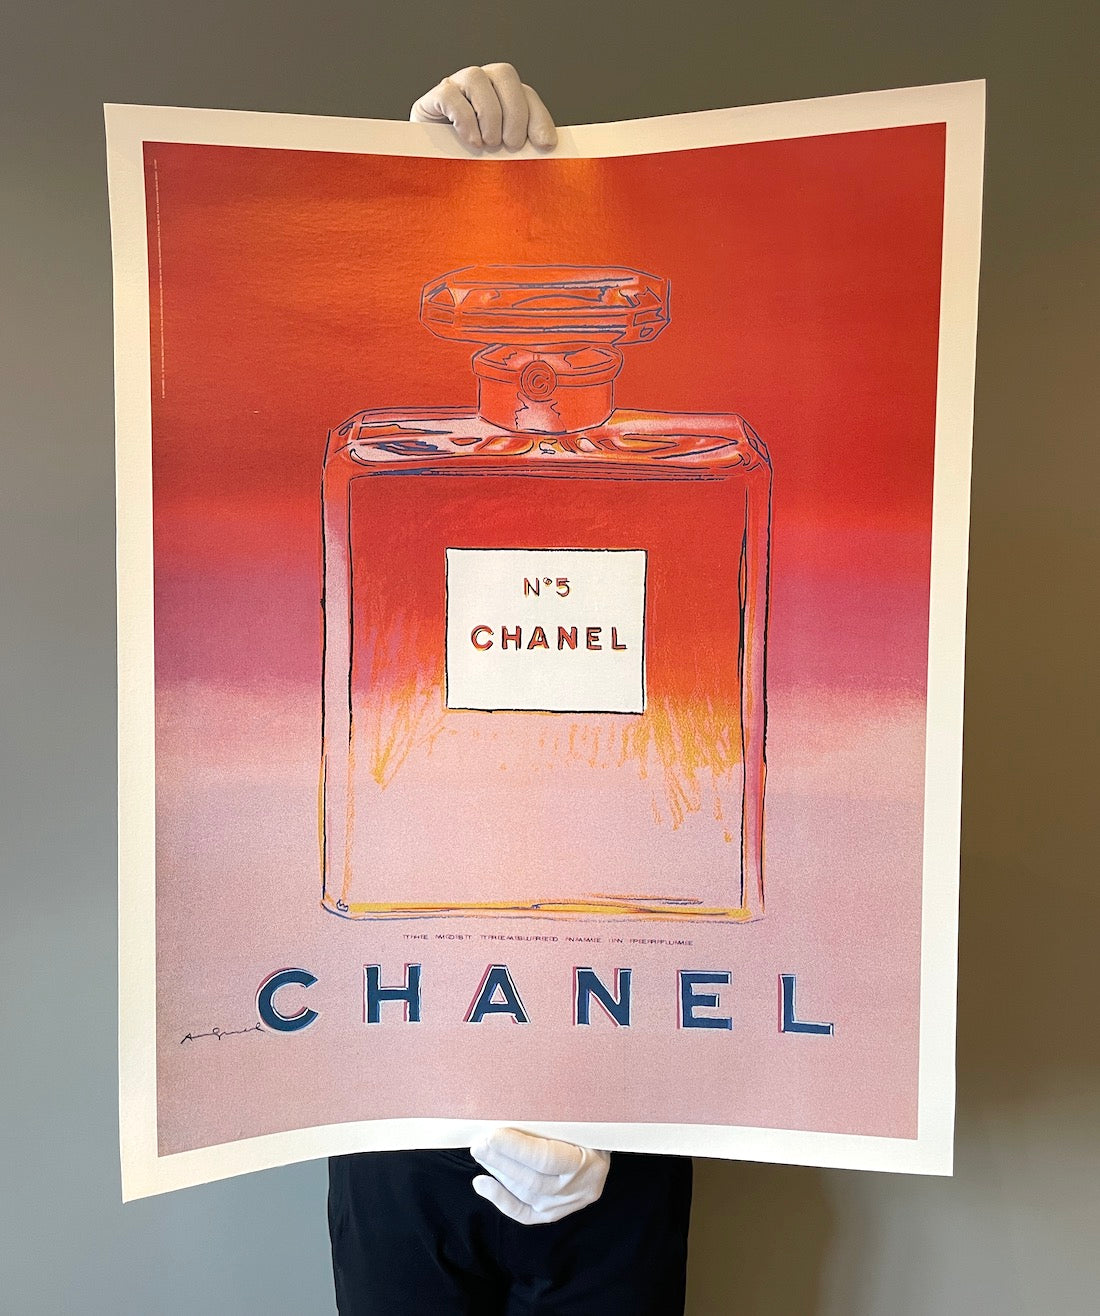 Andy Warhol, Chanel No. 5 (Red/Pink) (ca. 1997), Available for Sale